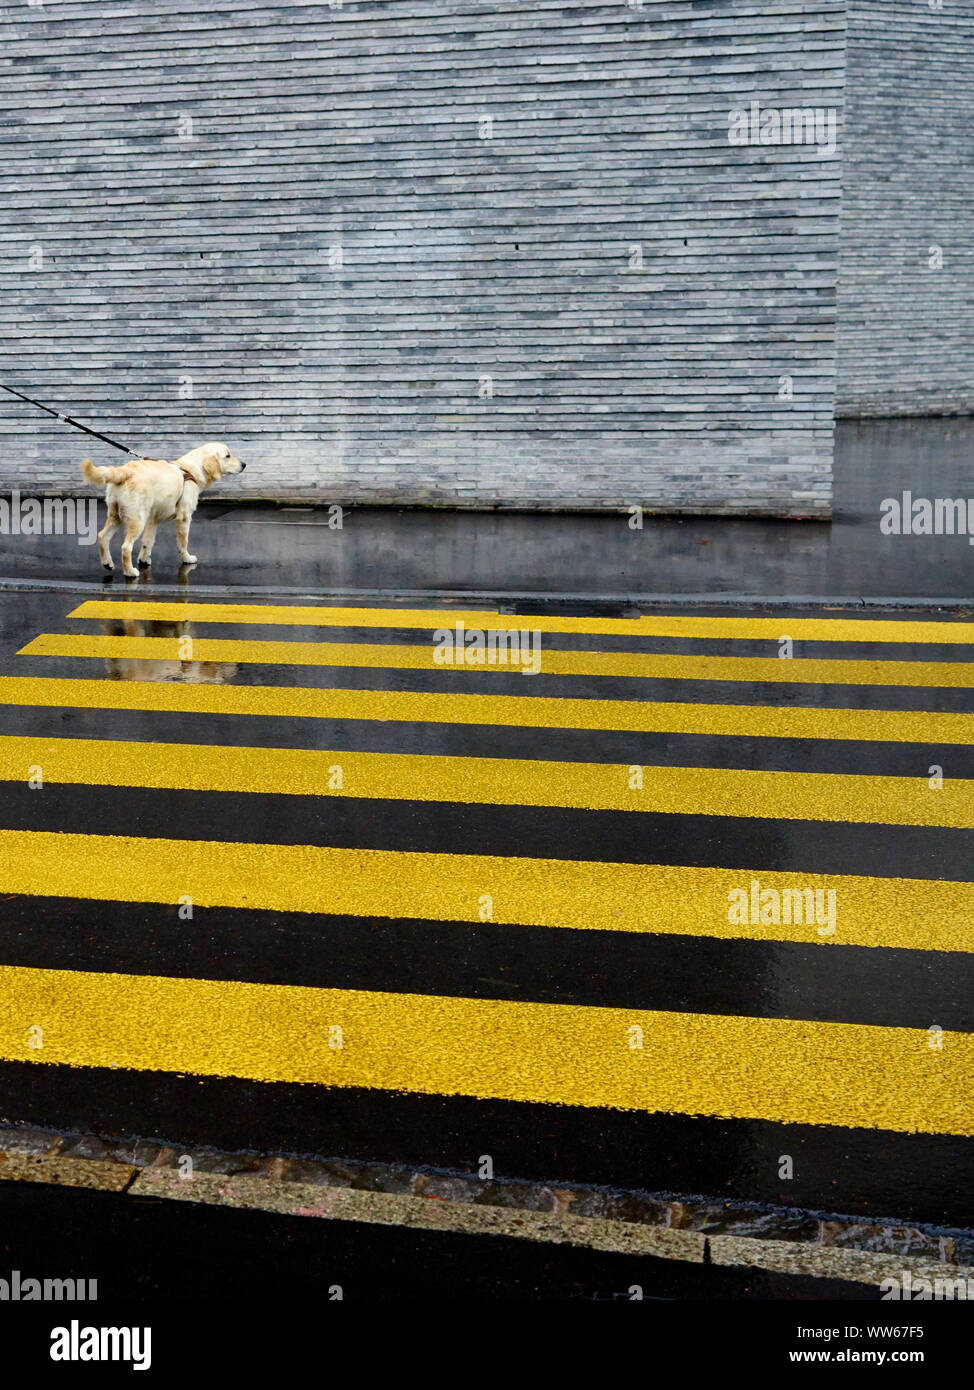 Labrador dog in the rain in front of a yellow zebra crossing Stock Photo